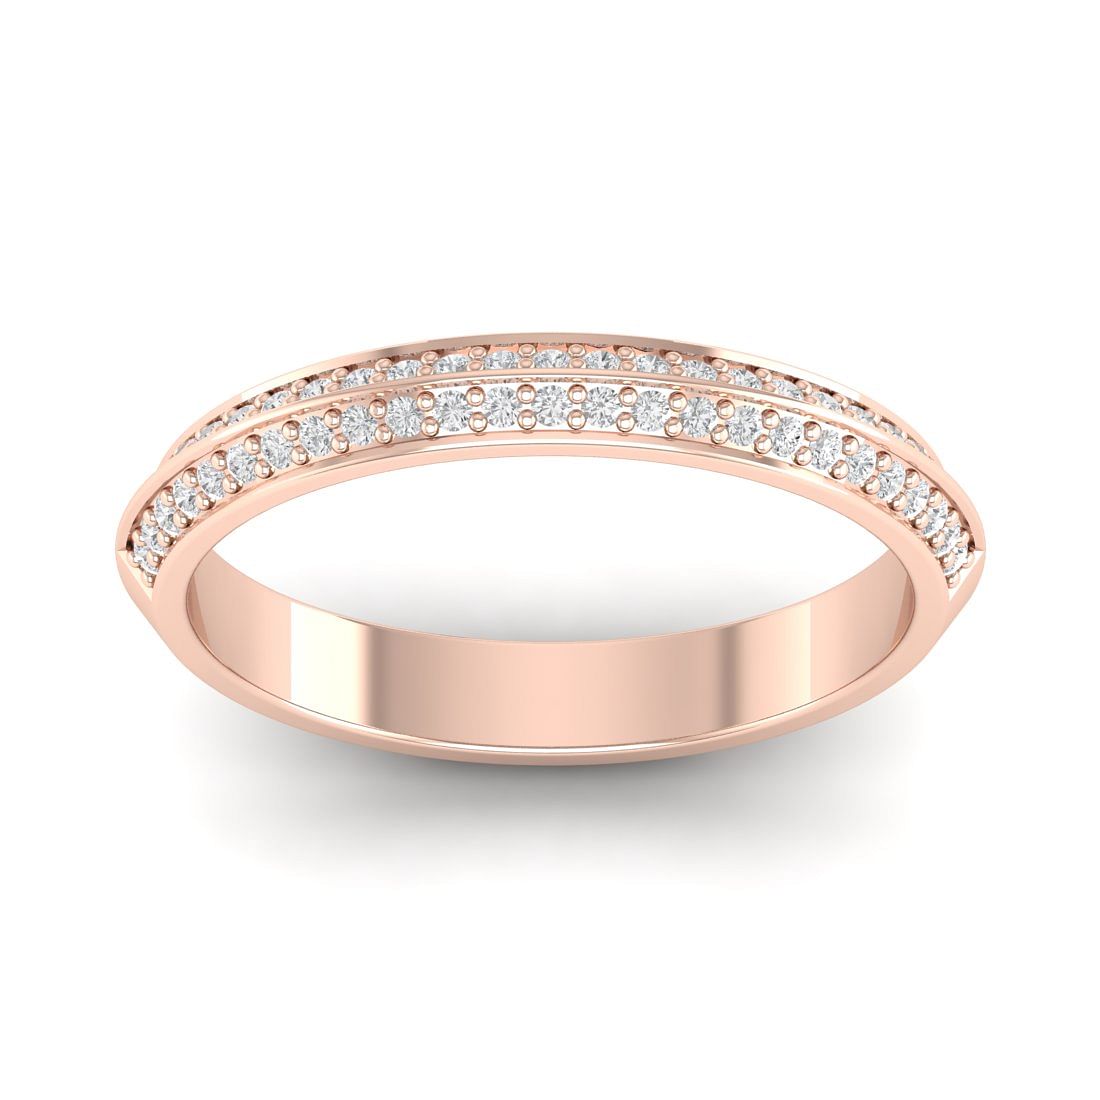 Chanchal band style rose gold diamond ring for women